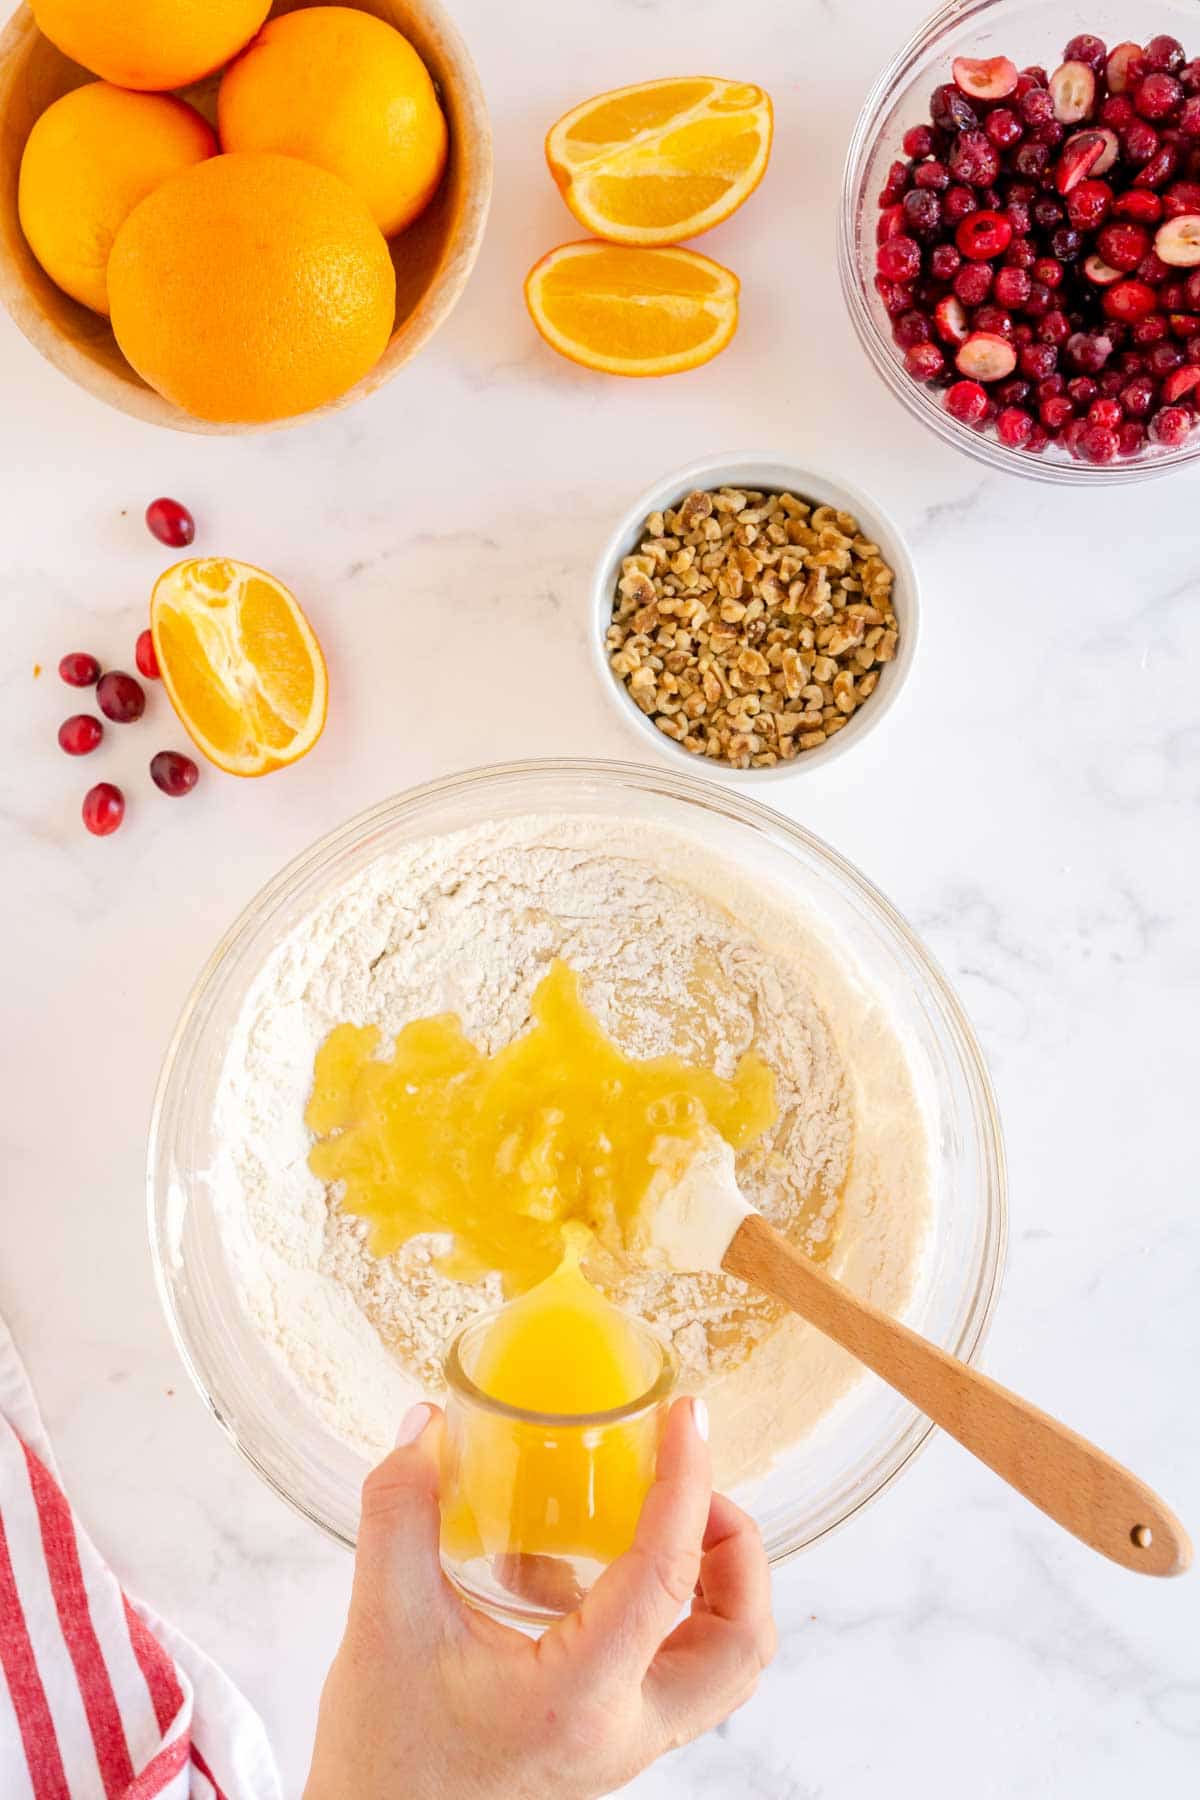 Woman's hand pouring orange juice into a glass bowl